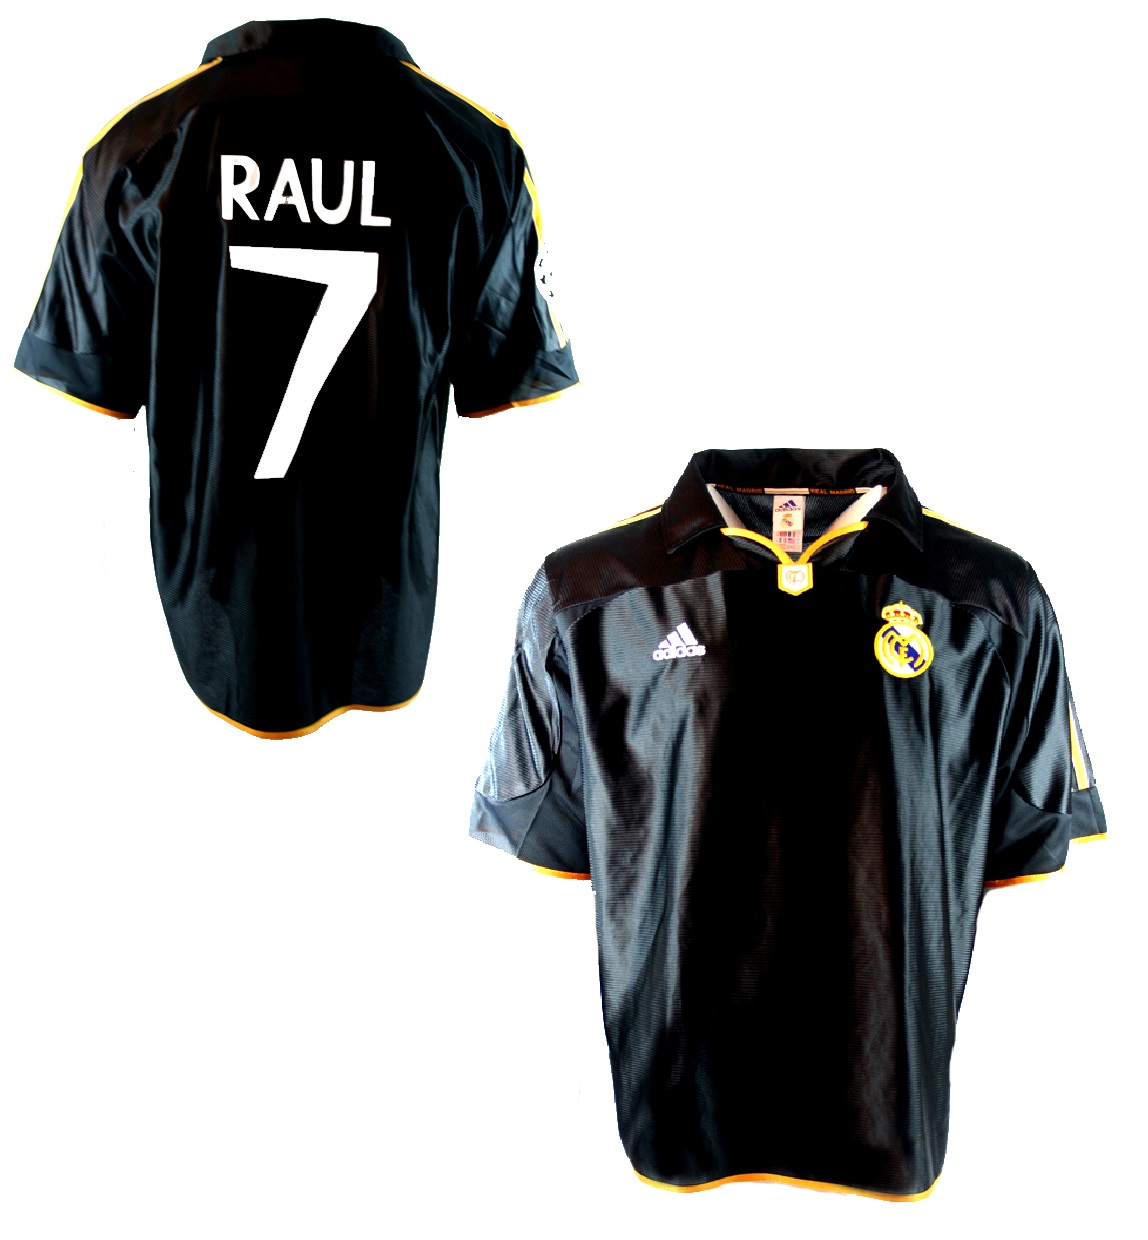 real madrid jersey 1999